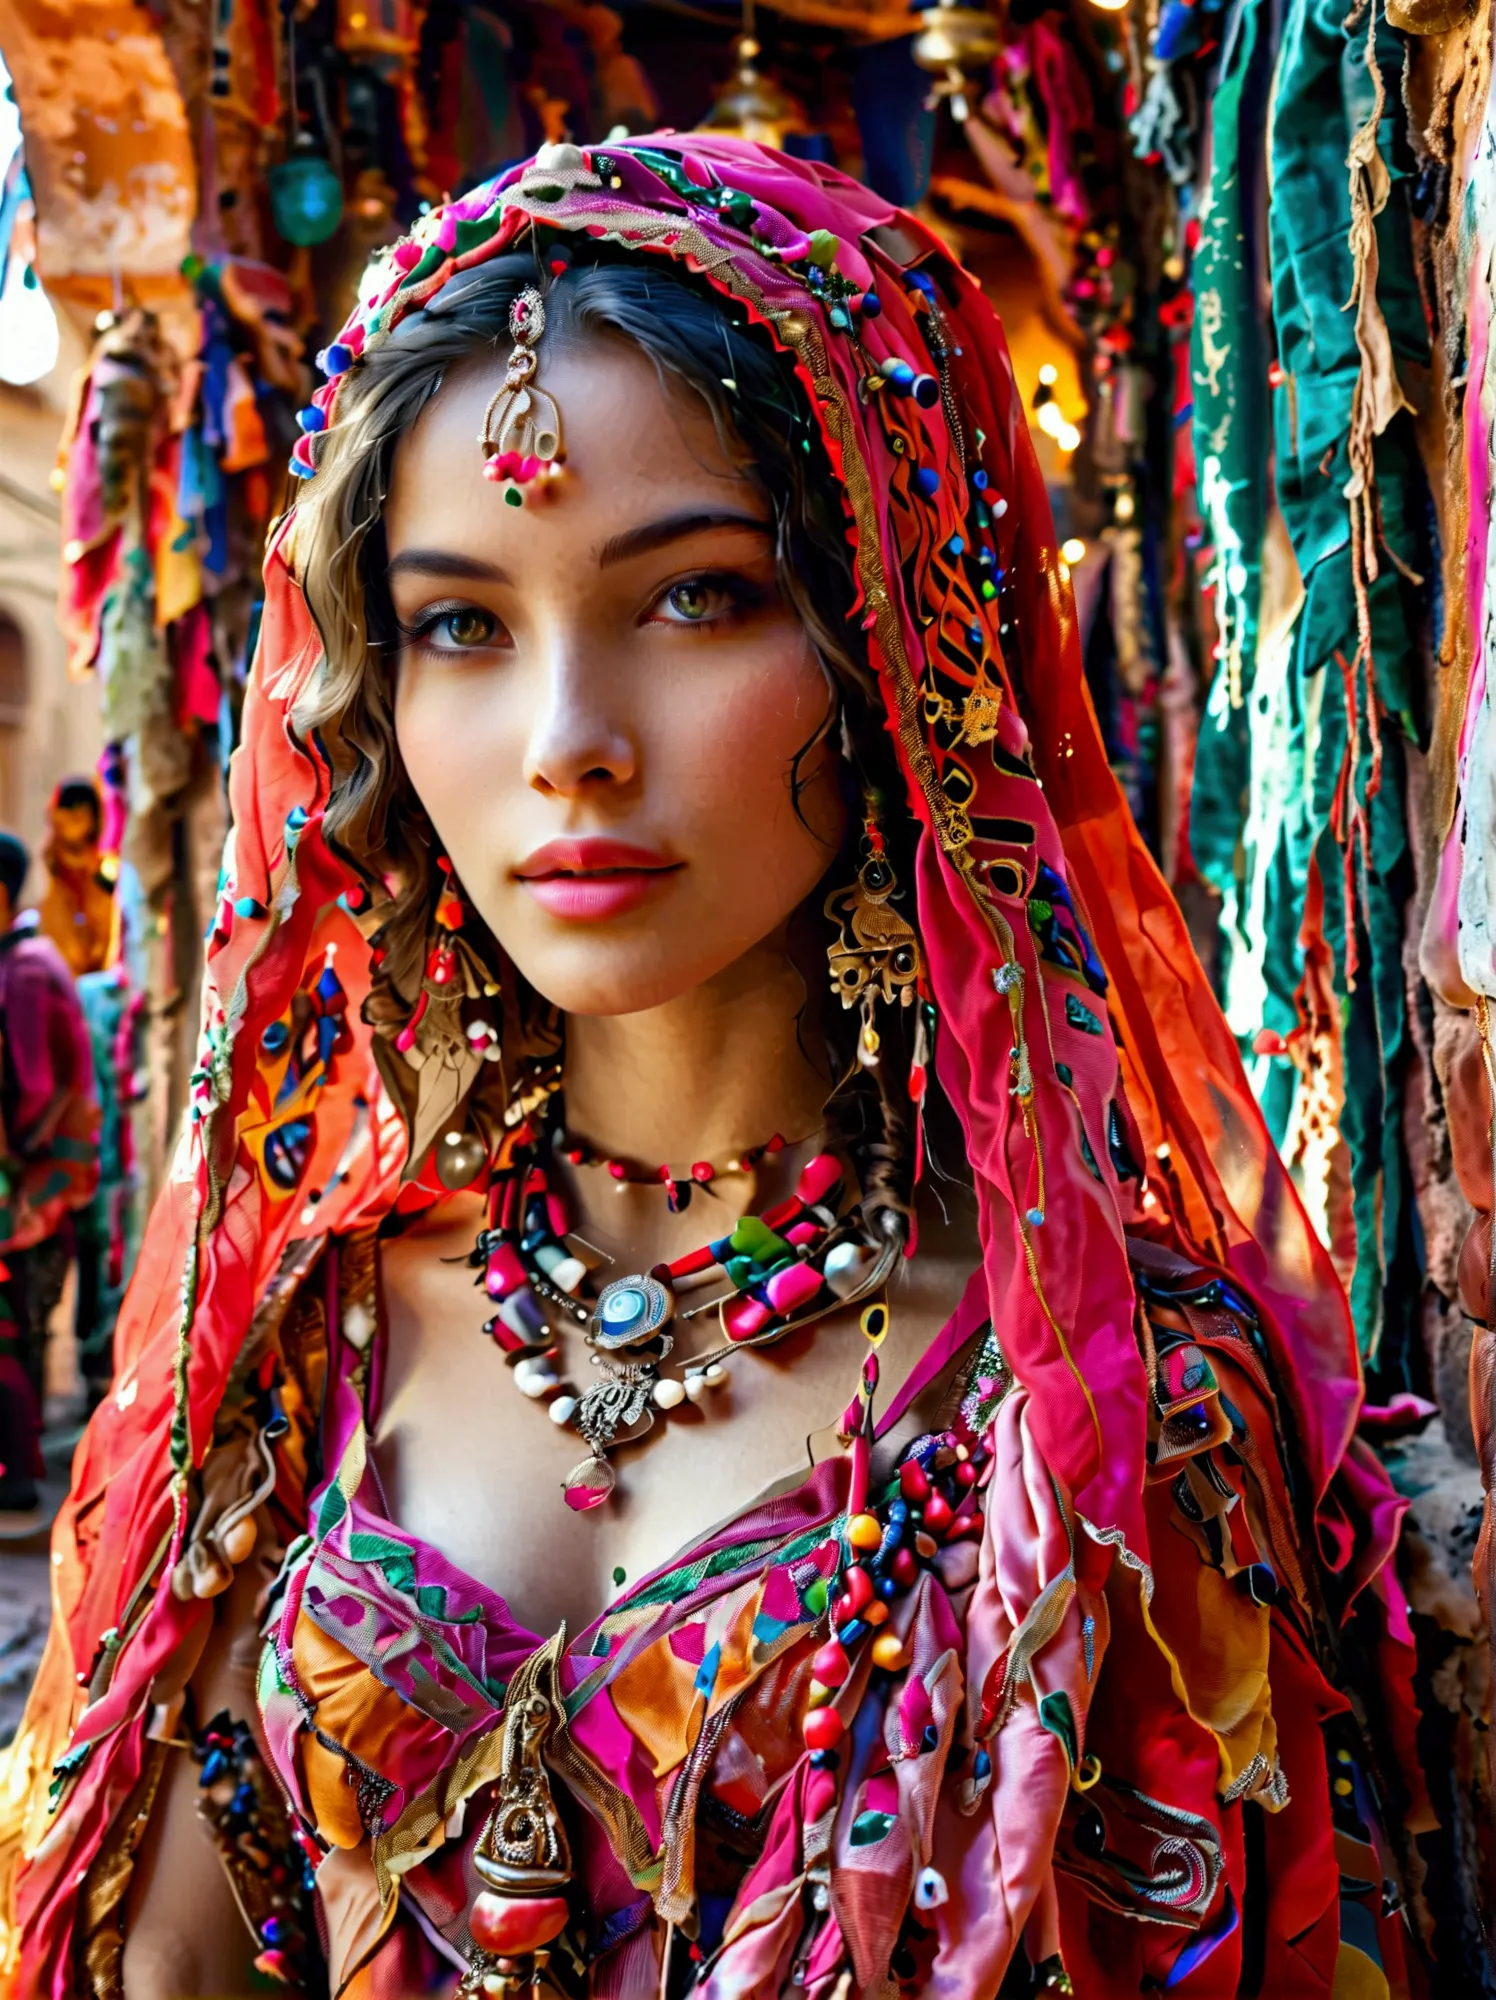 Desert Princess, dressed in vibrant traditional attire, steeped in an atmosphere brimming with magic and whimsy, similar to the ...